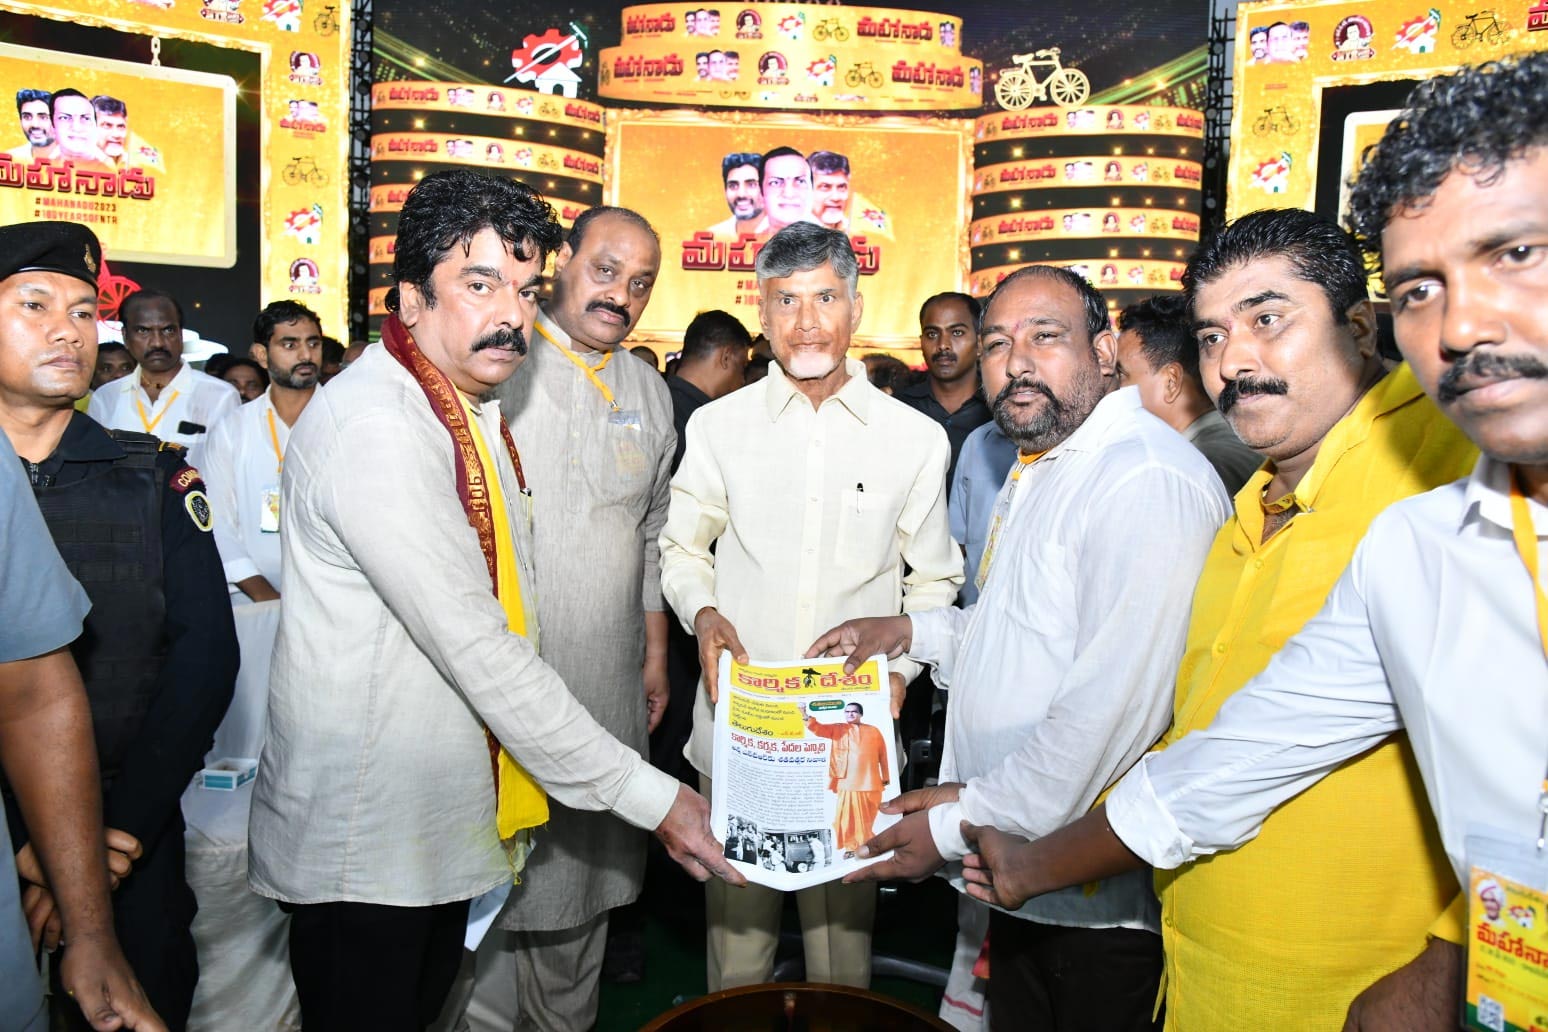 Read all Latest Updates on and about TDP party